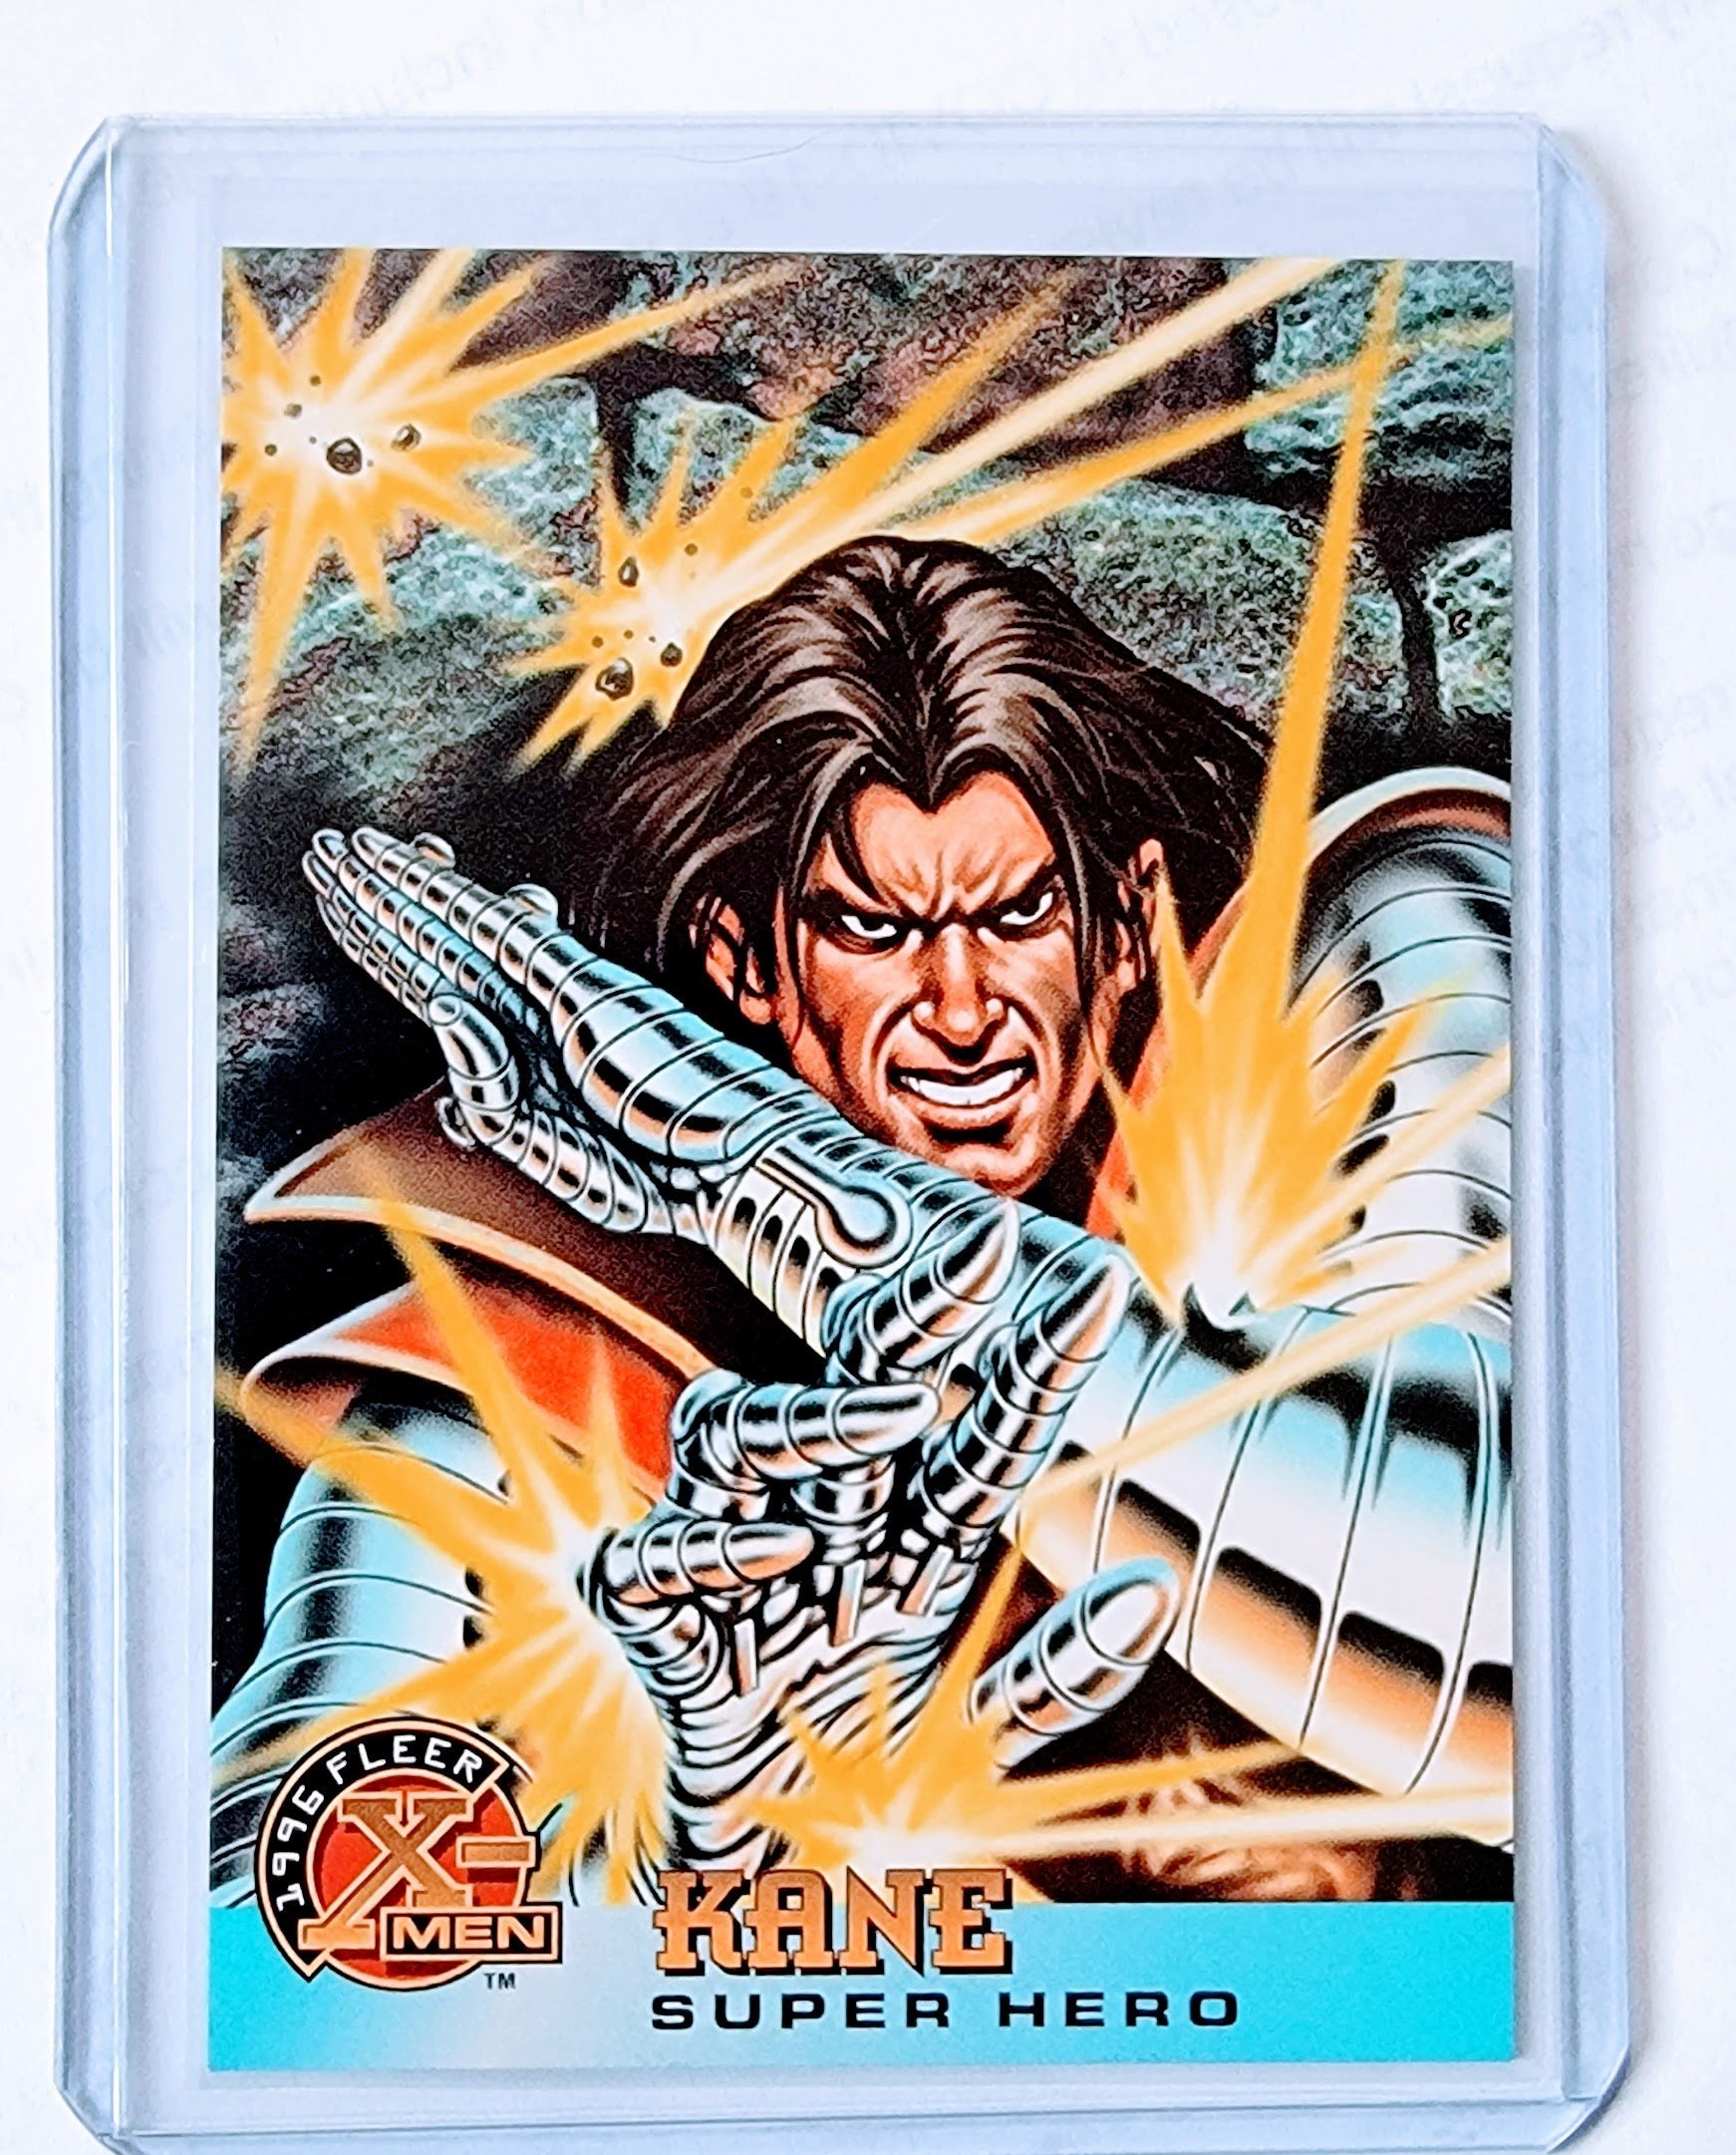 1996 Fleer X-Men Kane Super Hero Marvel Trading Card GRB1 simple Xclusive Collectibles   